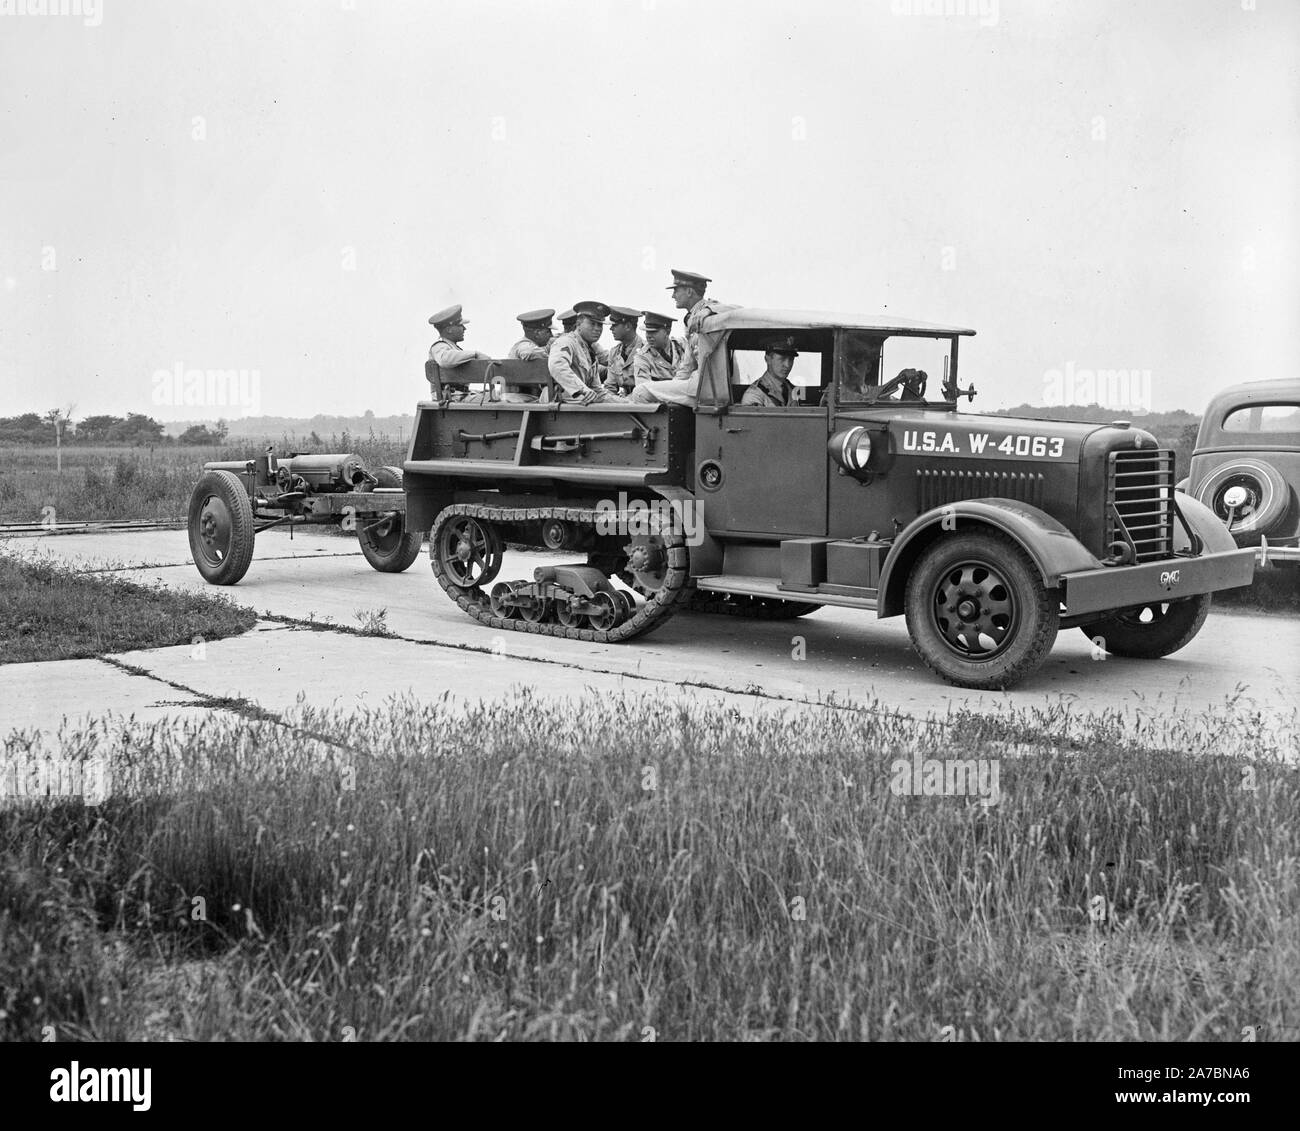 Half-track type military vehicile pulling a large gun ca. 1936 Stock Photo